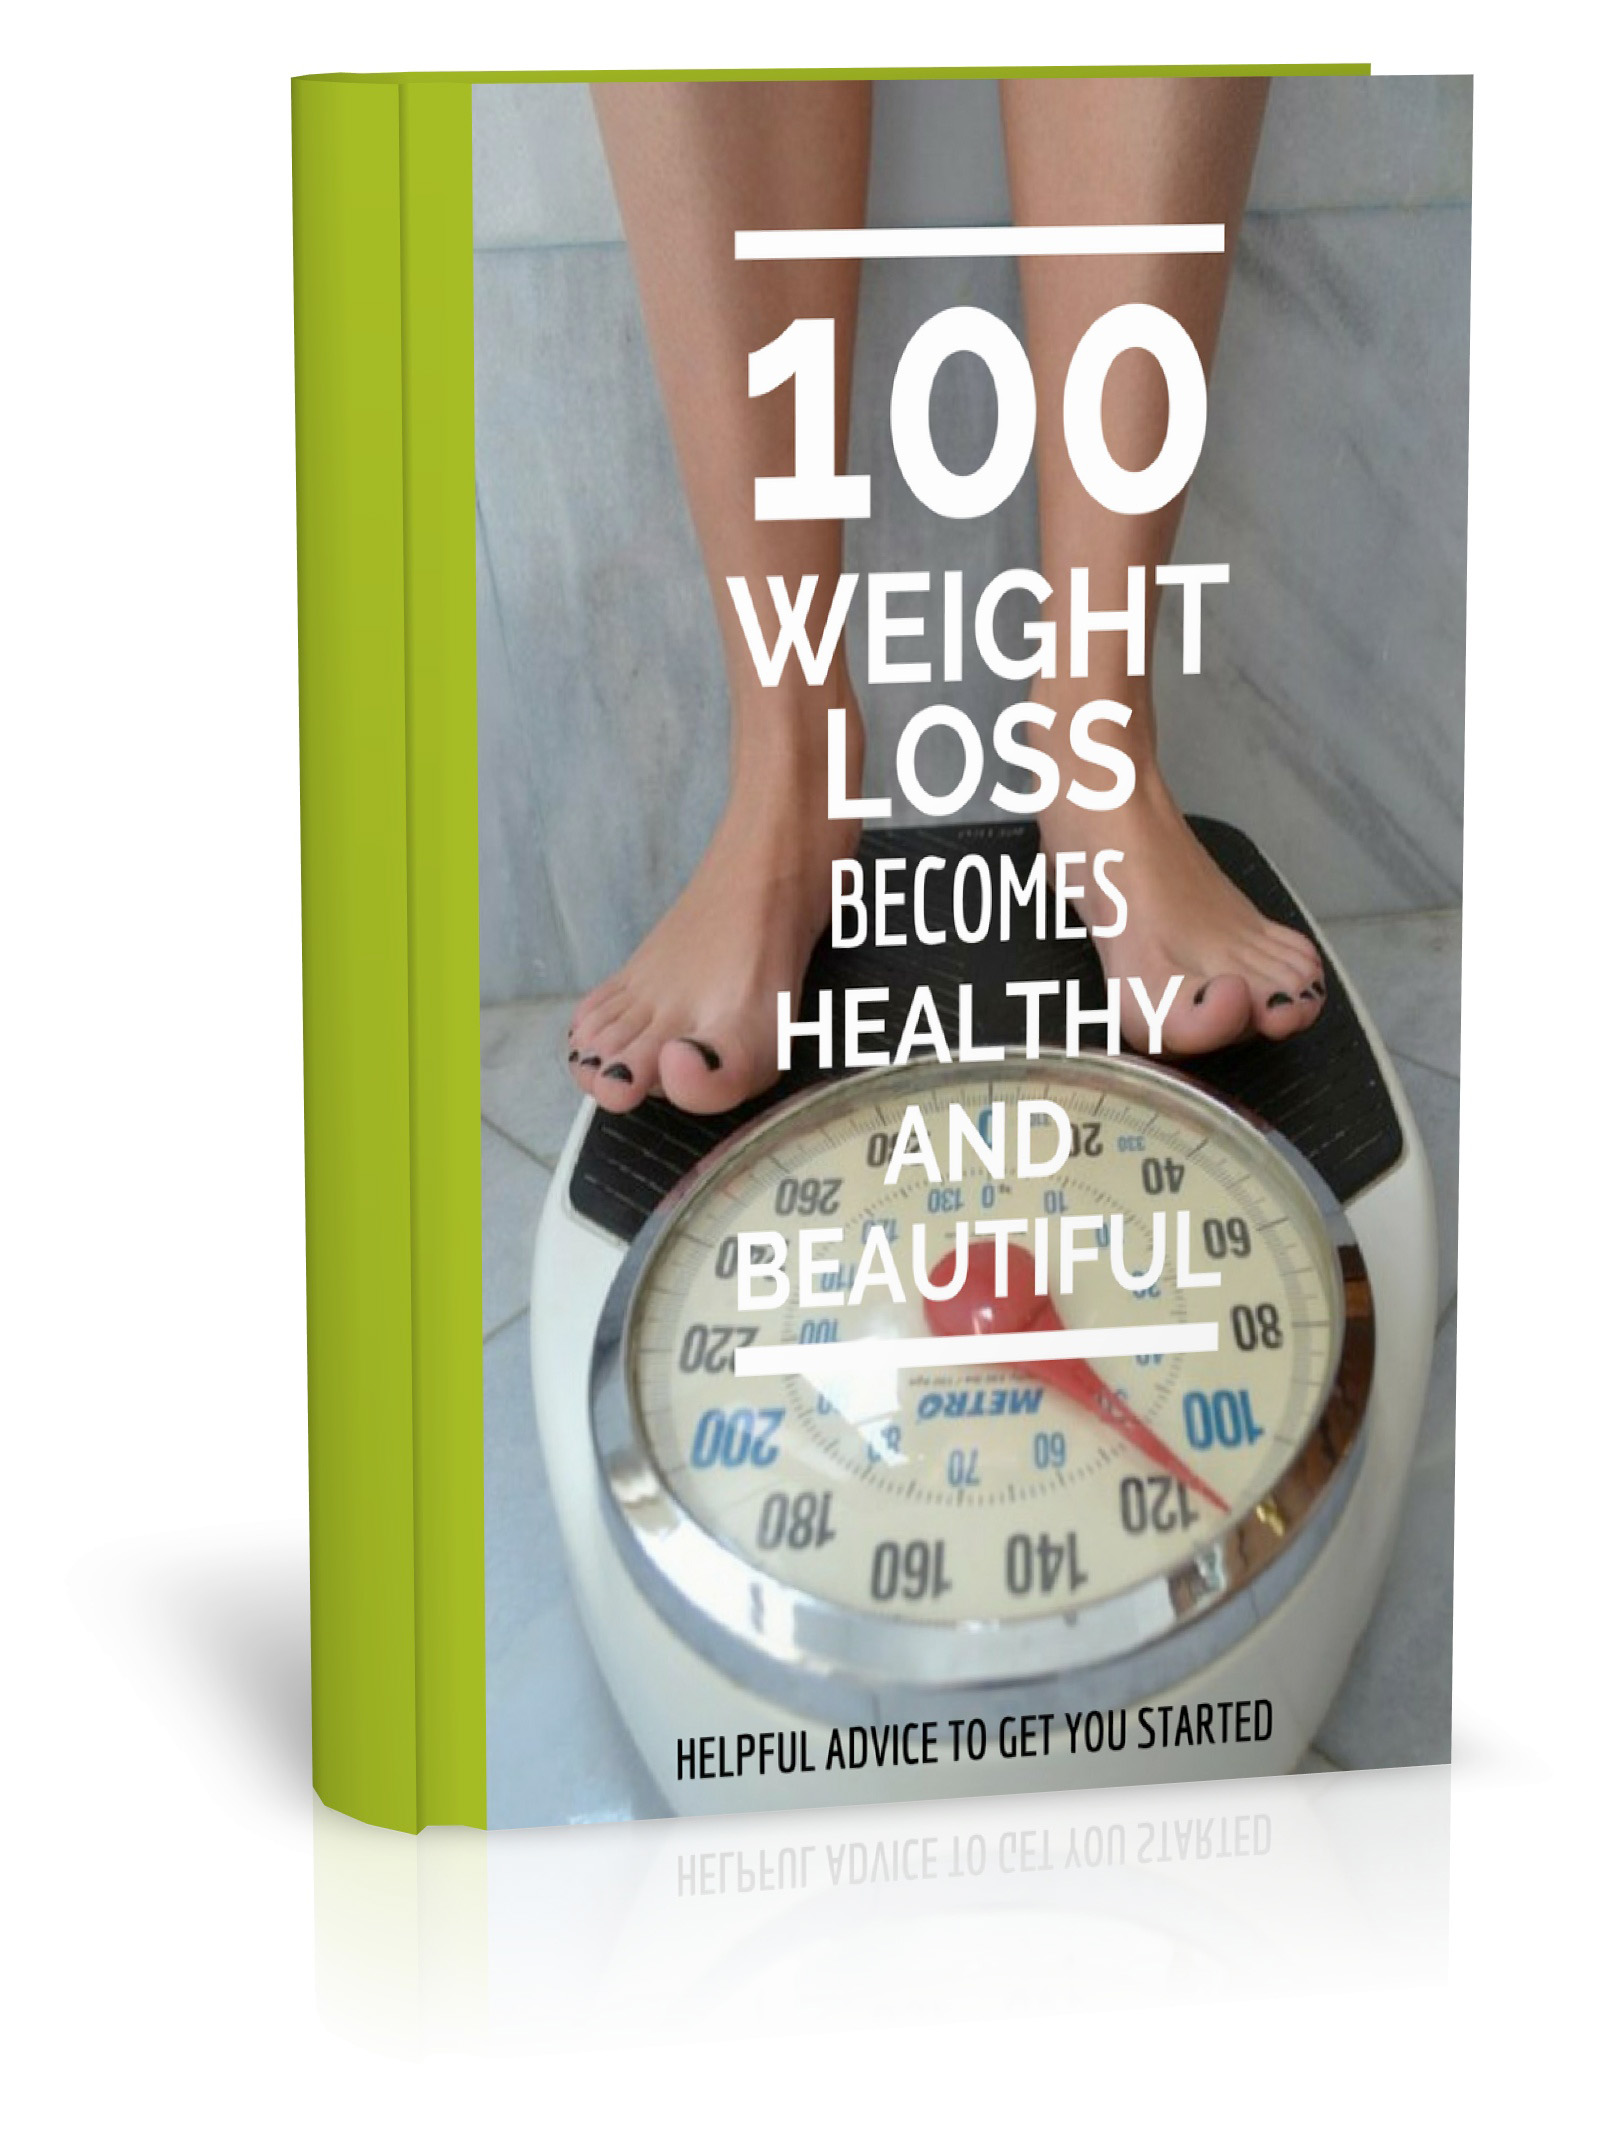 Find Study Fine Studio FREE eBOOK | Weight Loss | 100 Weight Loss Becomes Healthy and Beautiful Tips (PDF) E-BOOK FREE DOWNLOAD  E-BOOK   